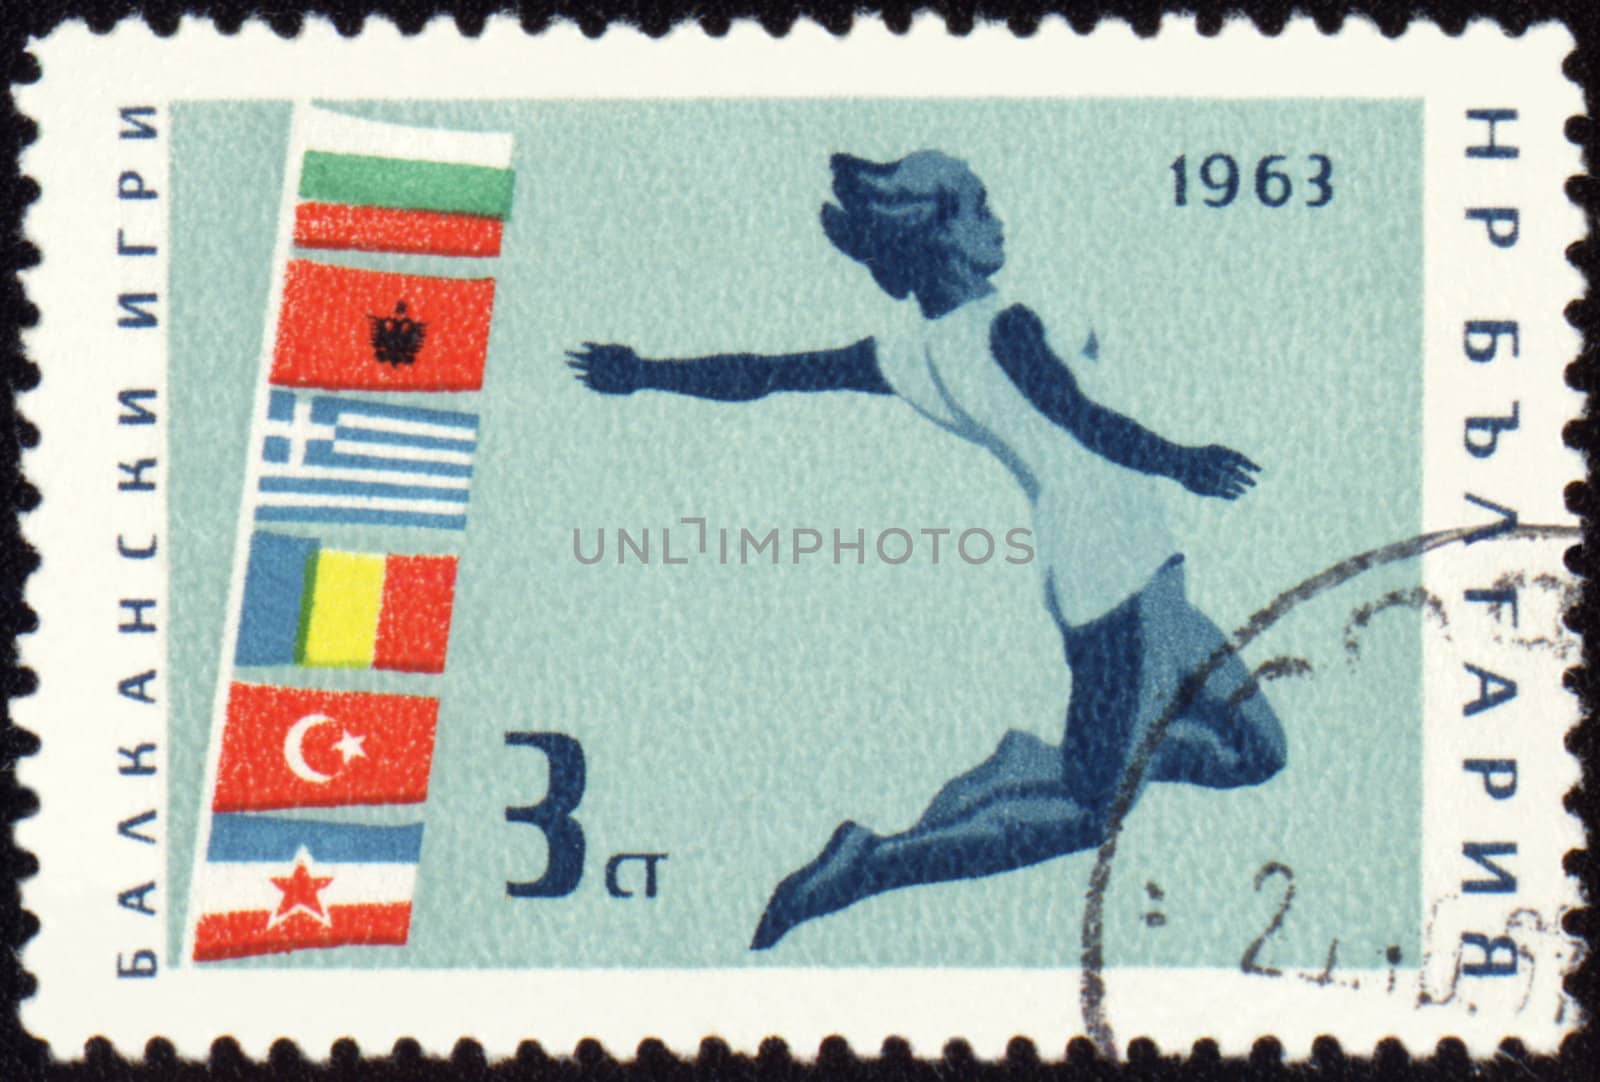 BULGARIA - CIRCA 1963: A post stamp printed in Bulgaria shows jumping athlete, devoted to Balkan games, series, circa 1963